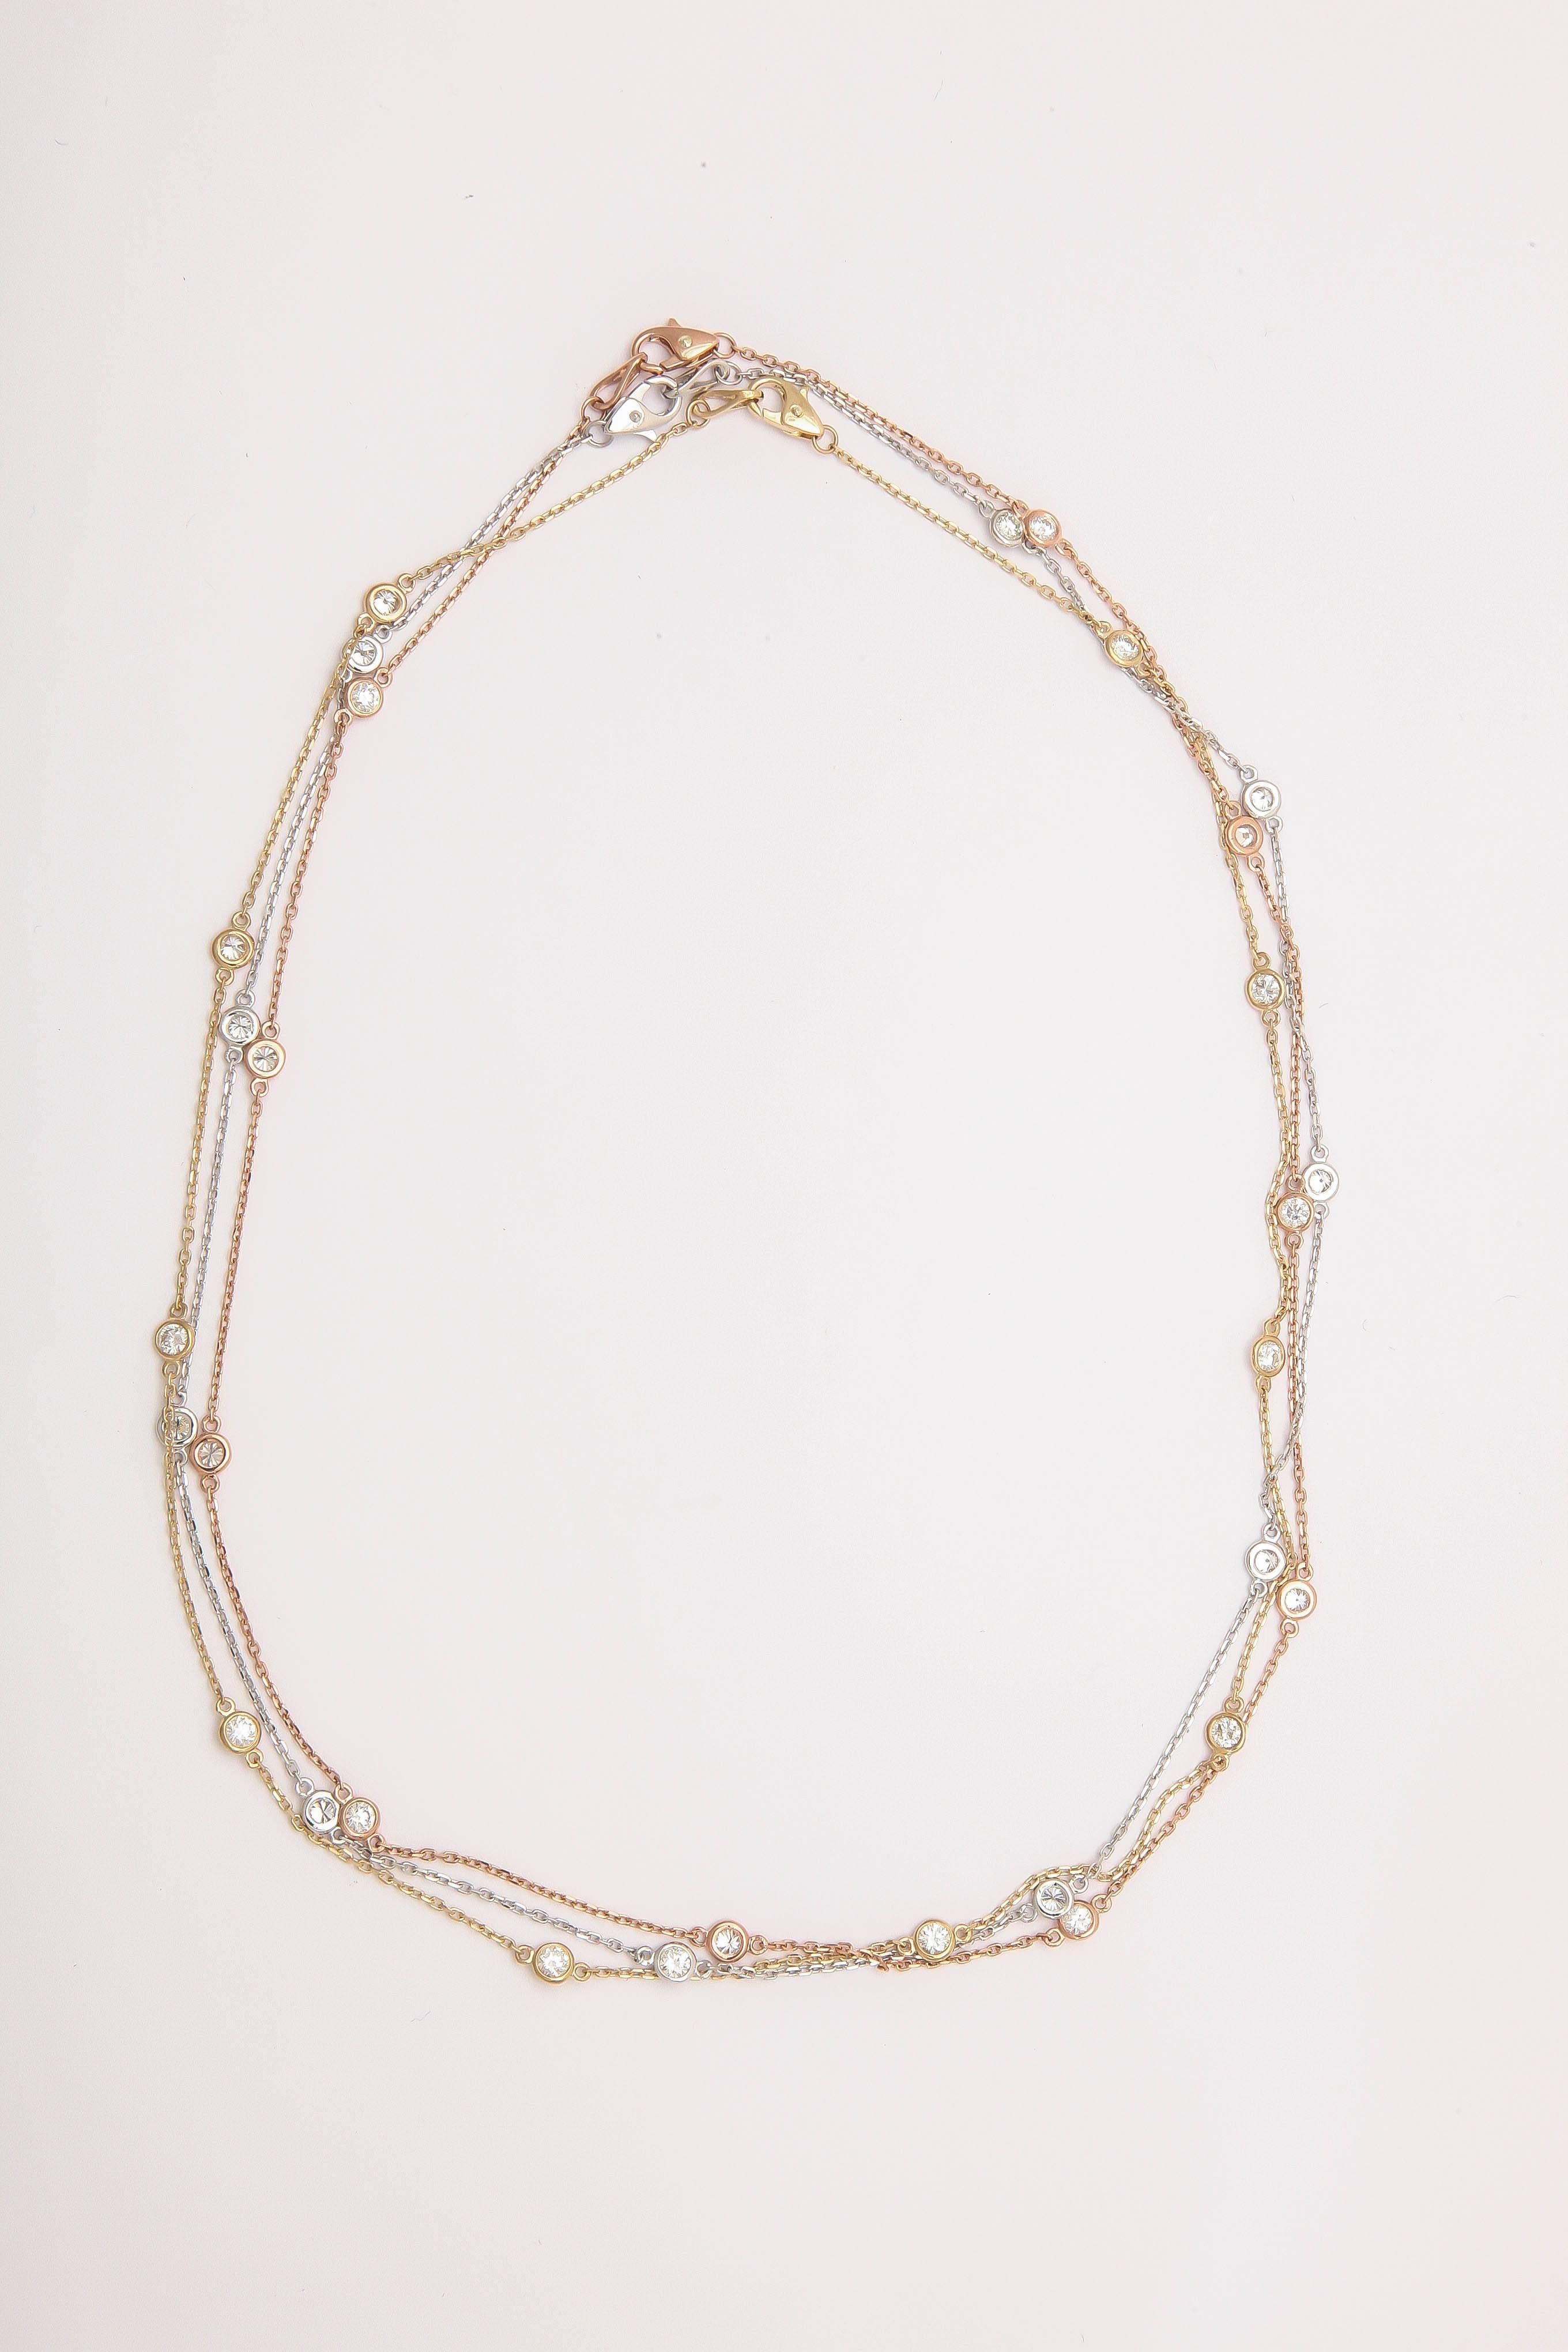 Contemporary Diamond Gold Chain Necklace For Sale